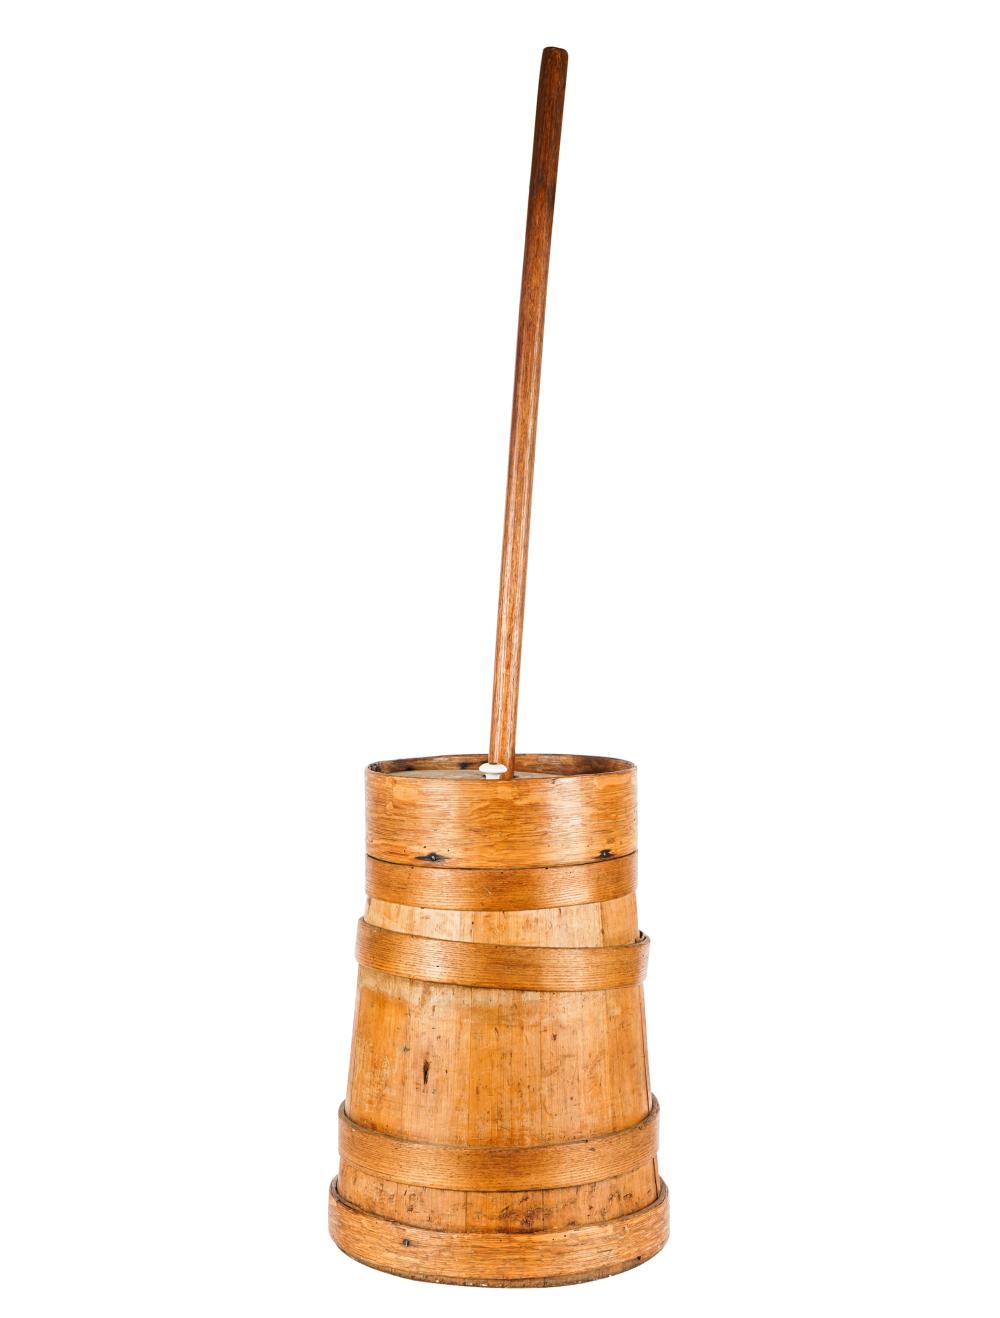 WOODEN BUTTER CHURNthe cover with